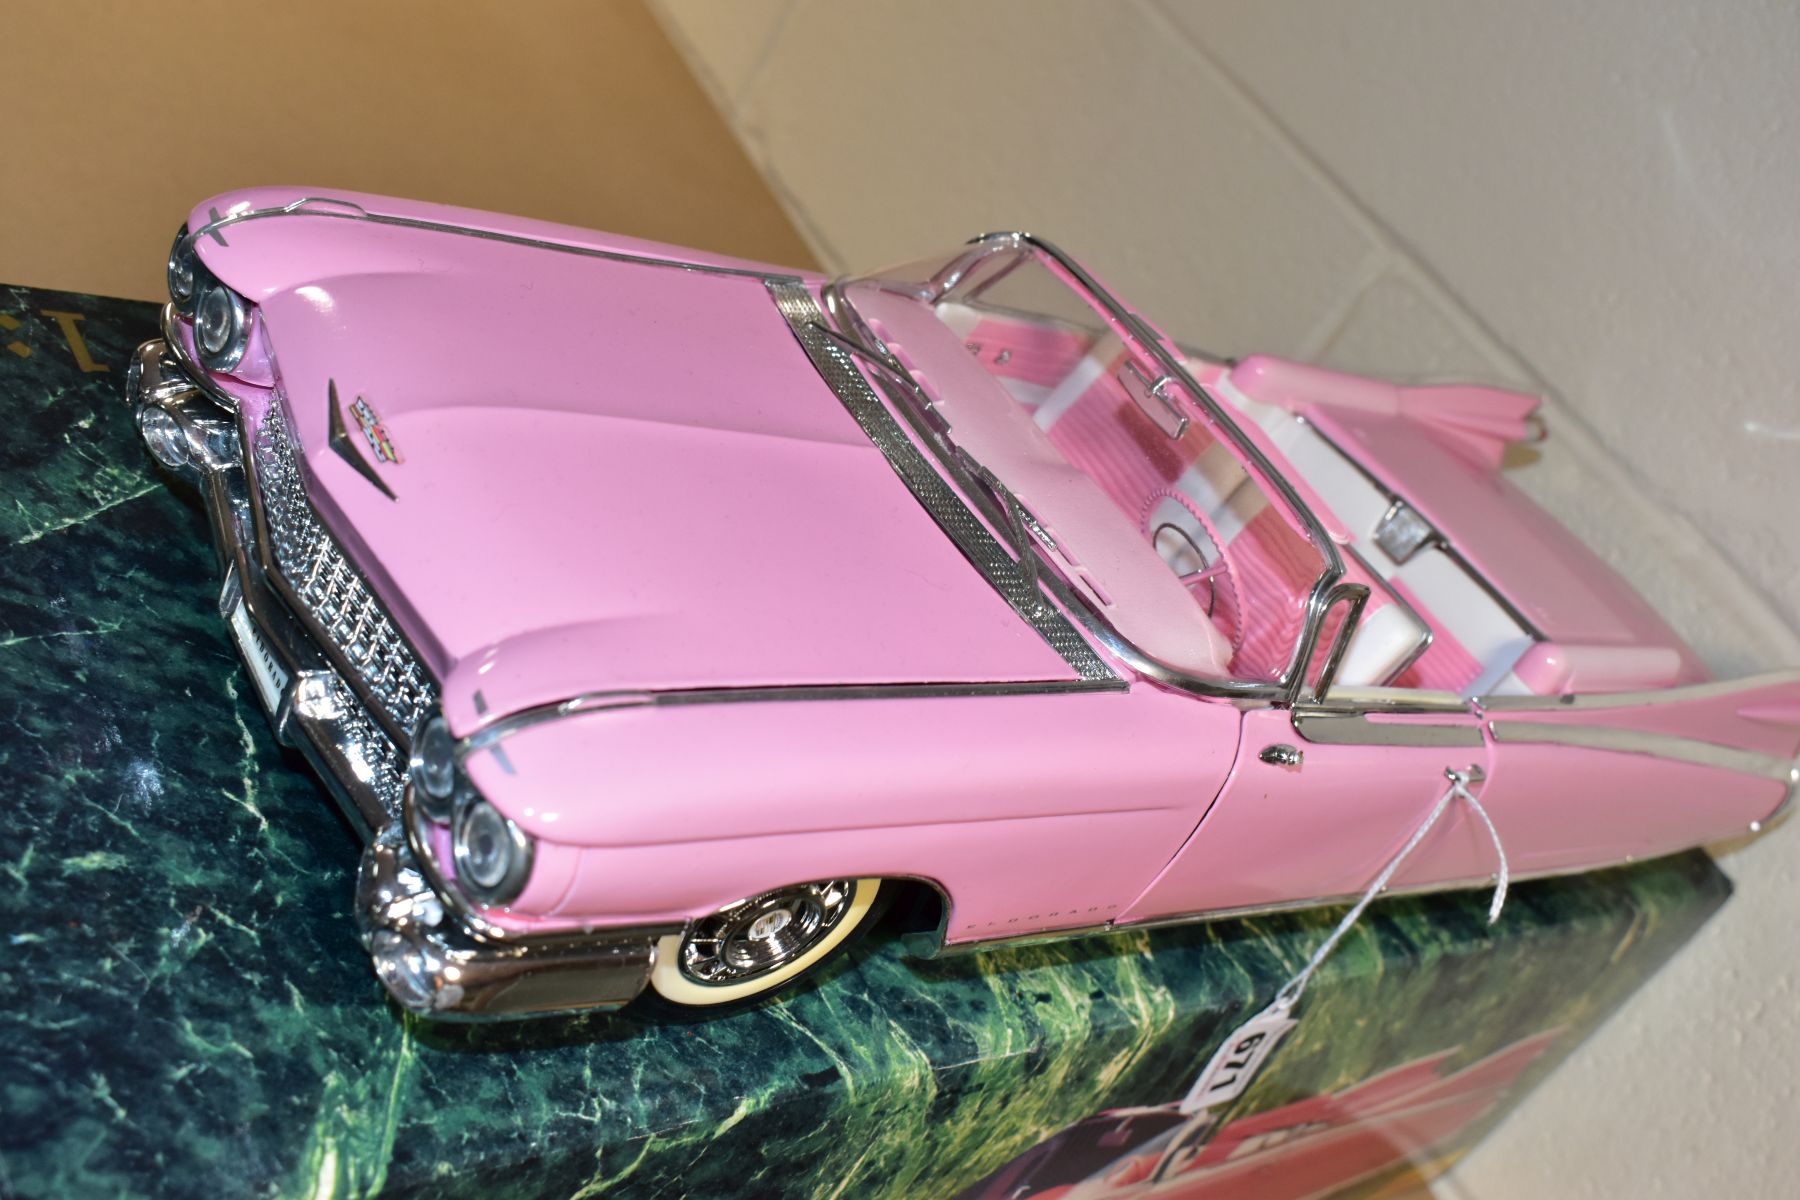 A BOXED MAISTO CADILLAC ELDORADO BIARRITZ (1959), No 33202, 1/12 scale, appears complete and in very - Image 2 of 6